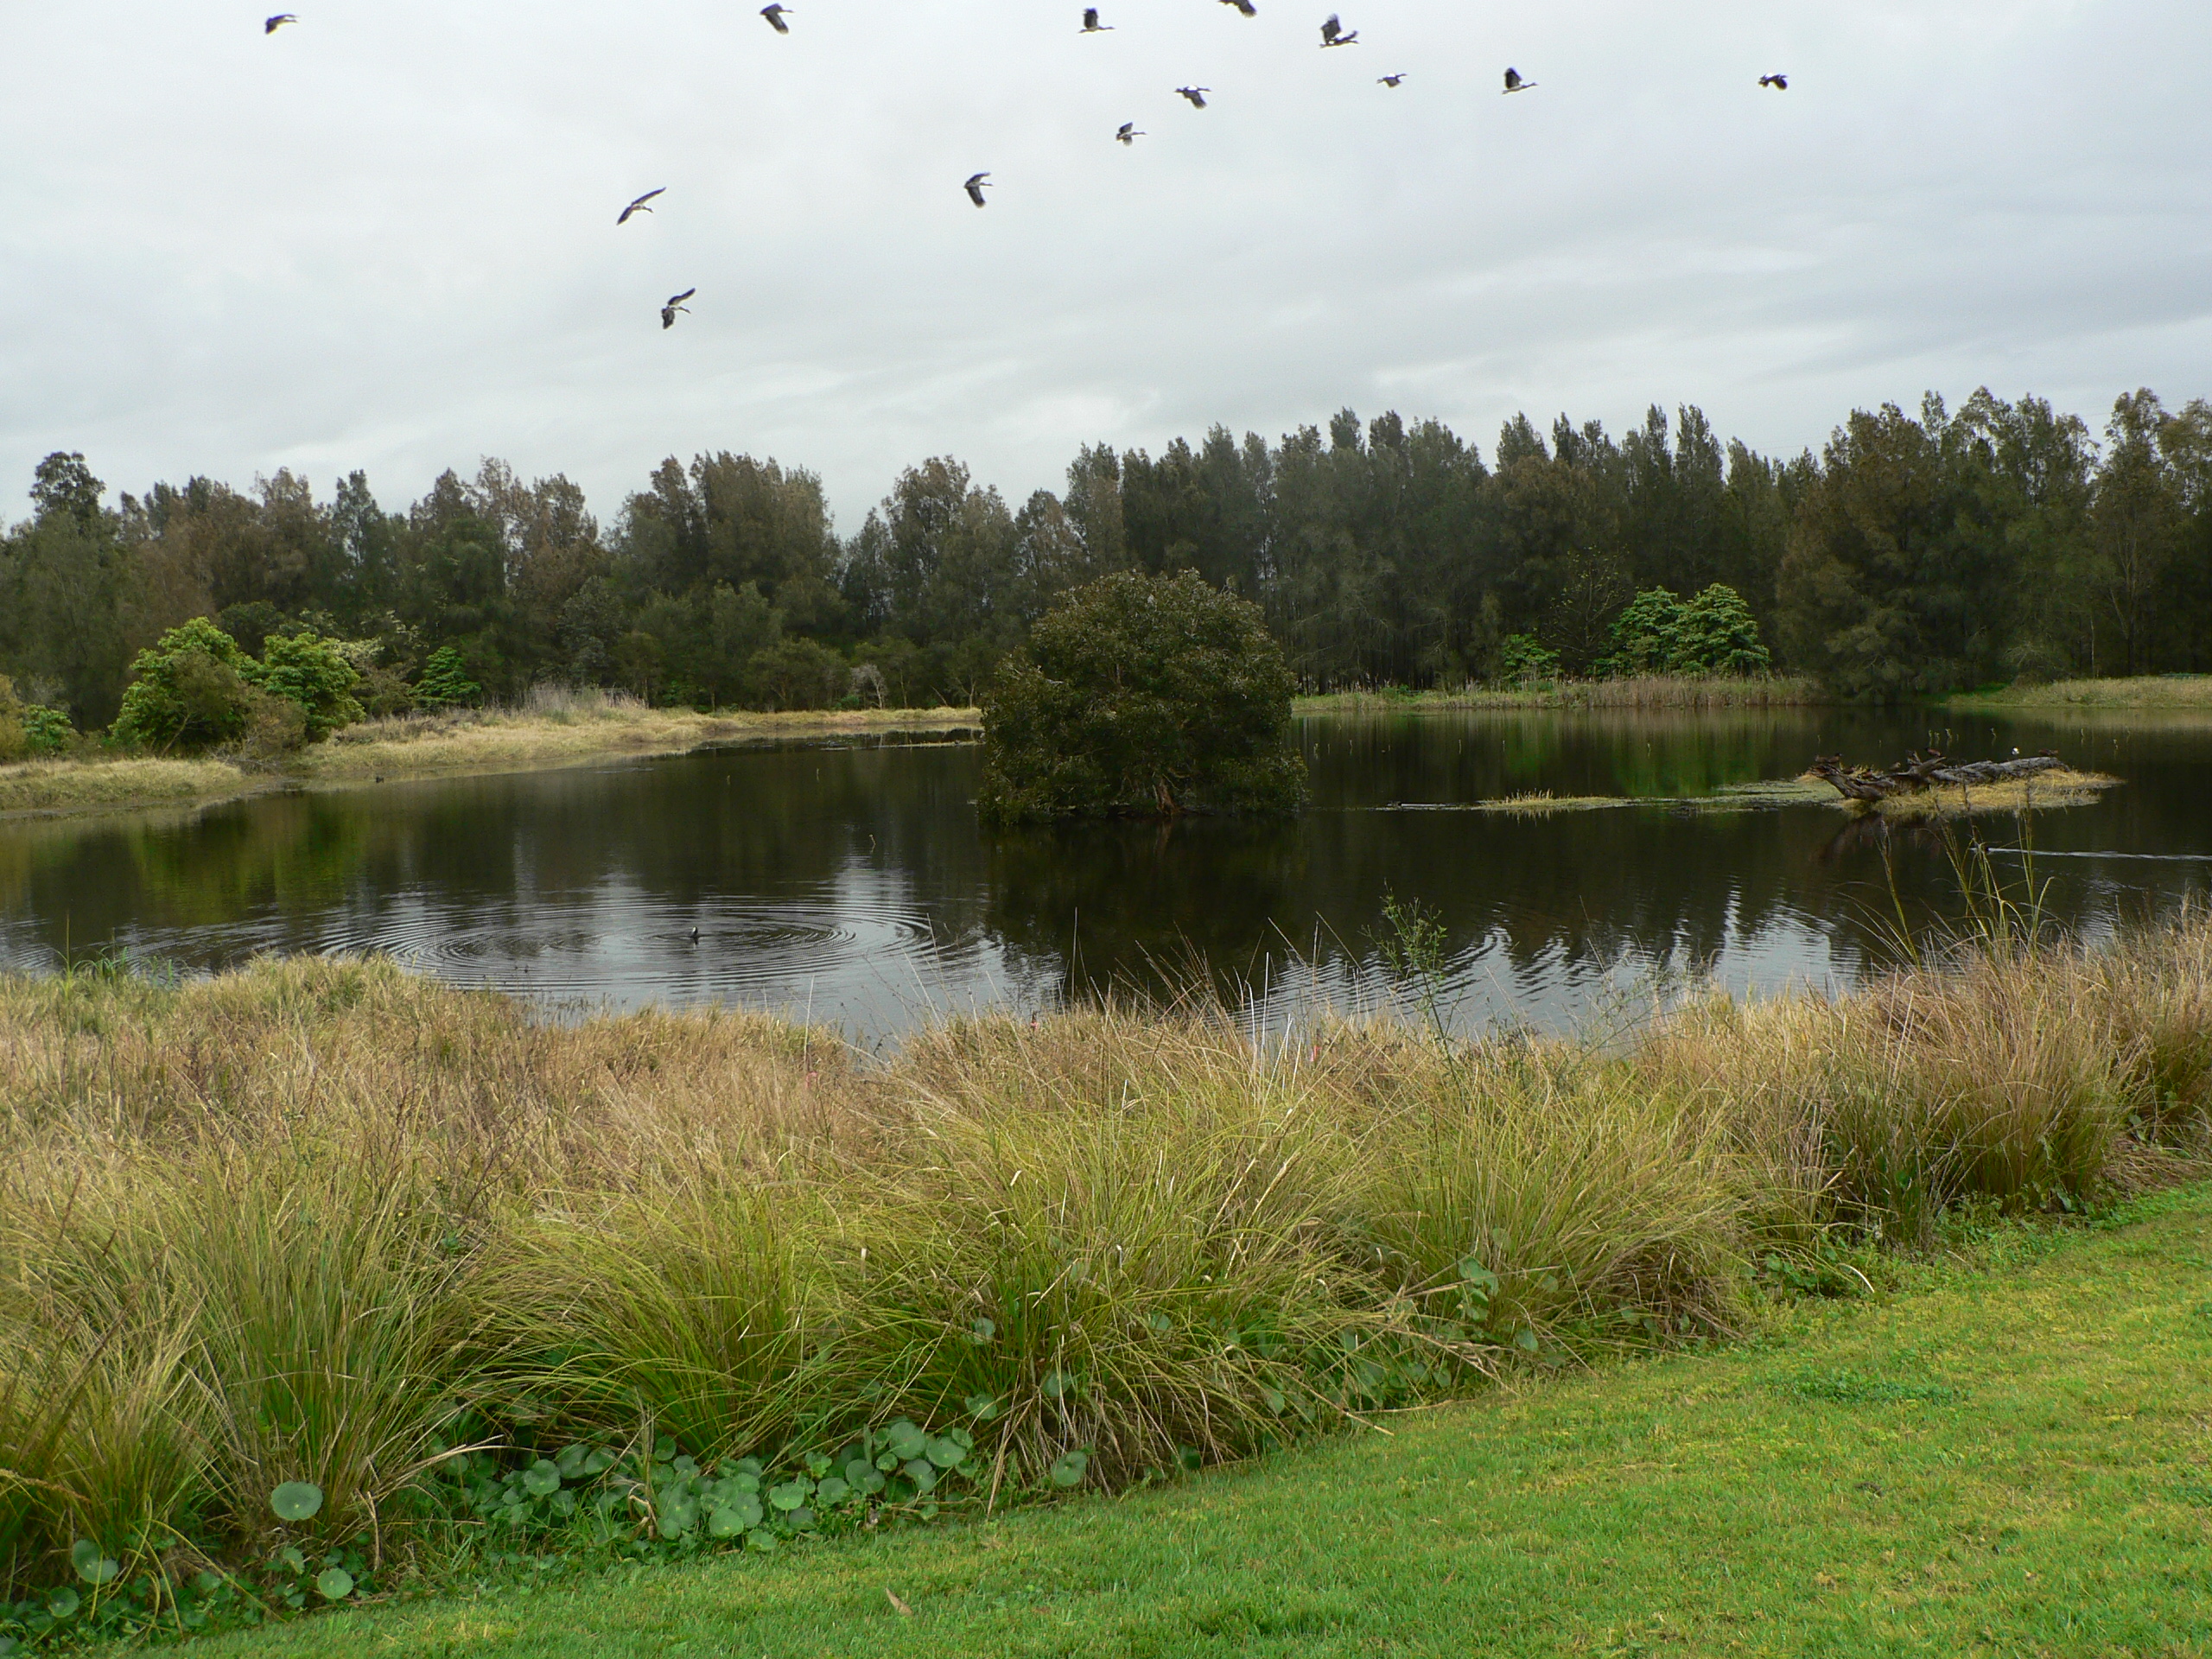 A large open pond surrounded by grass and trees. there is a tree growing in the pond and birds flying in the air above the pond.